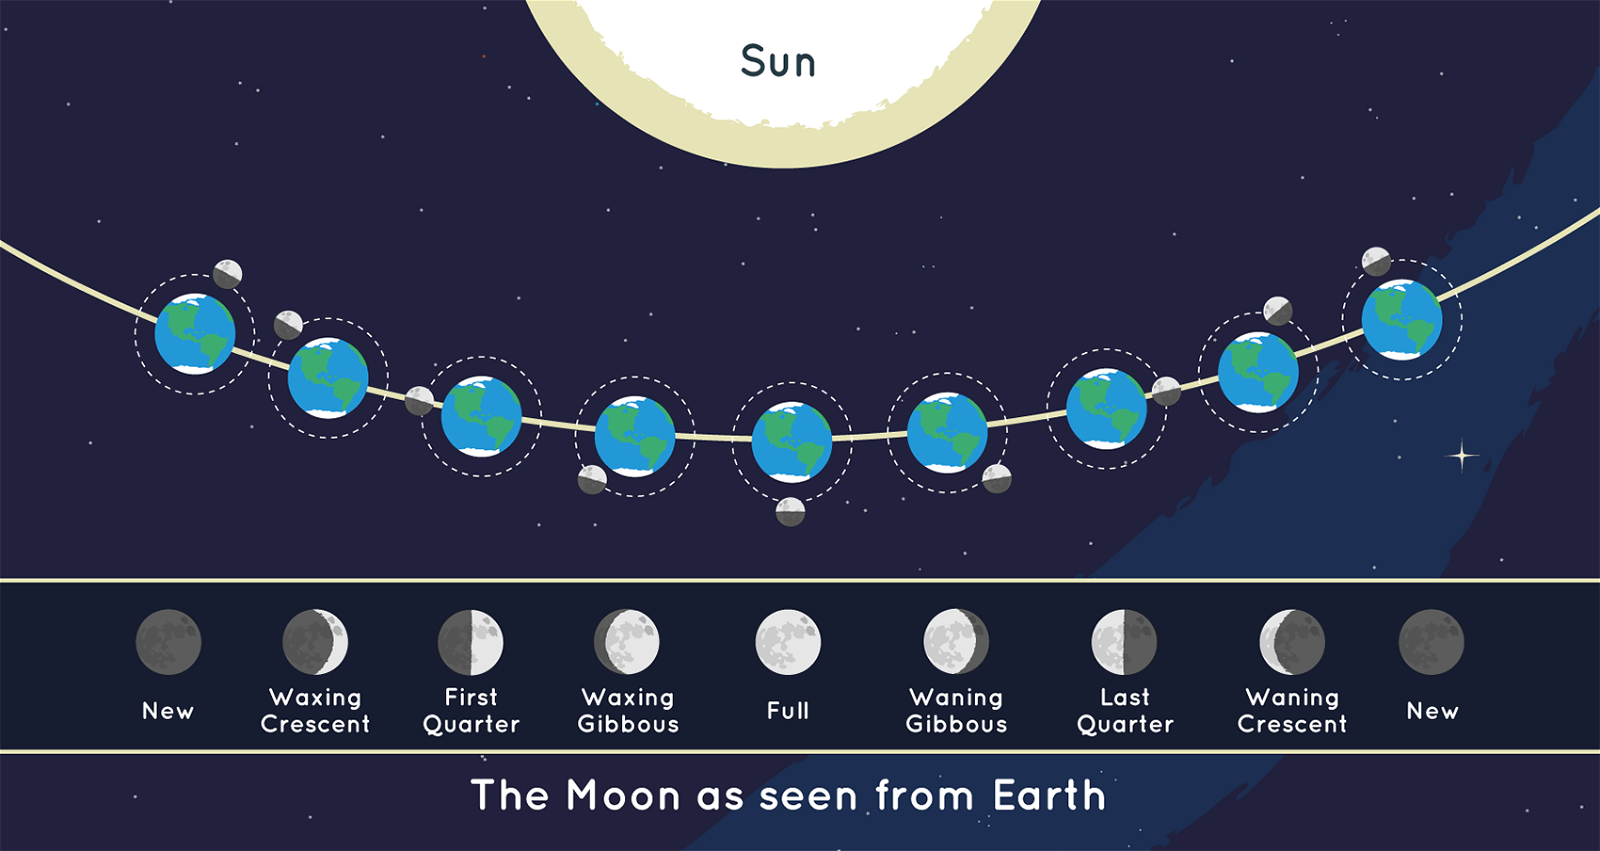 Graphic (not to scale) showing the position of the earth, moon, and sun during each of the moon’s phases, as it appears from the earth